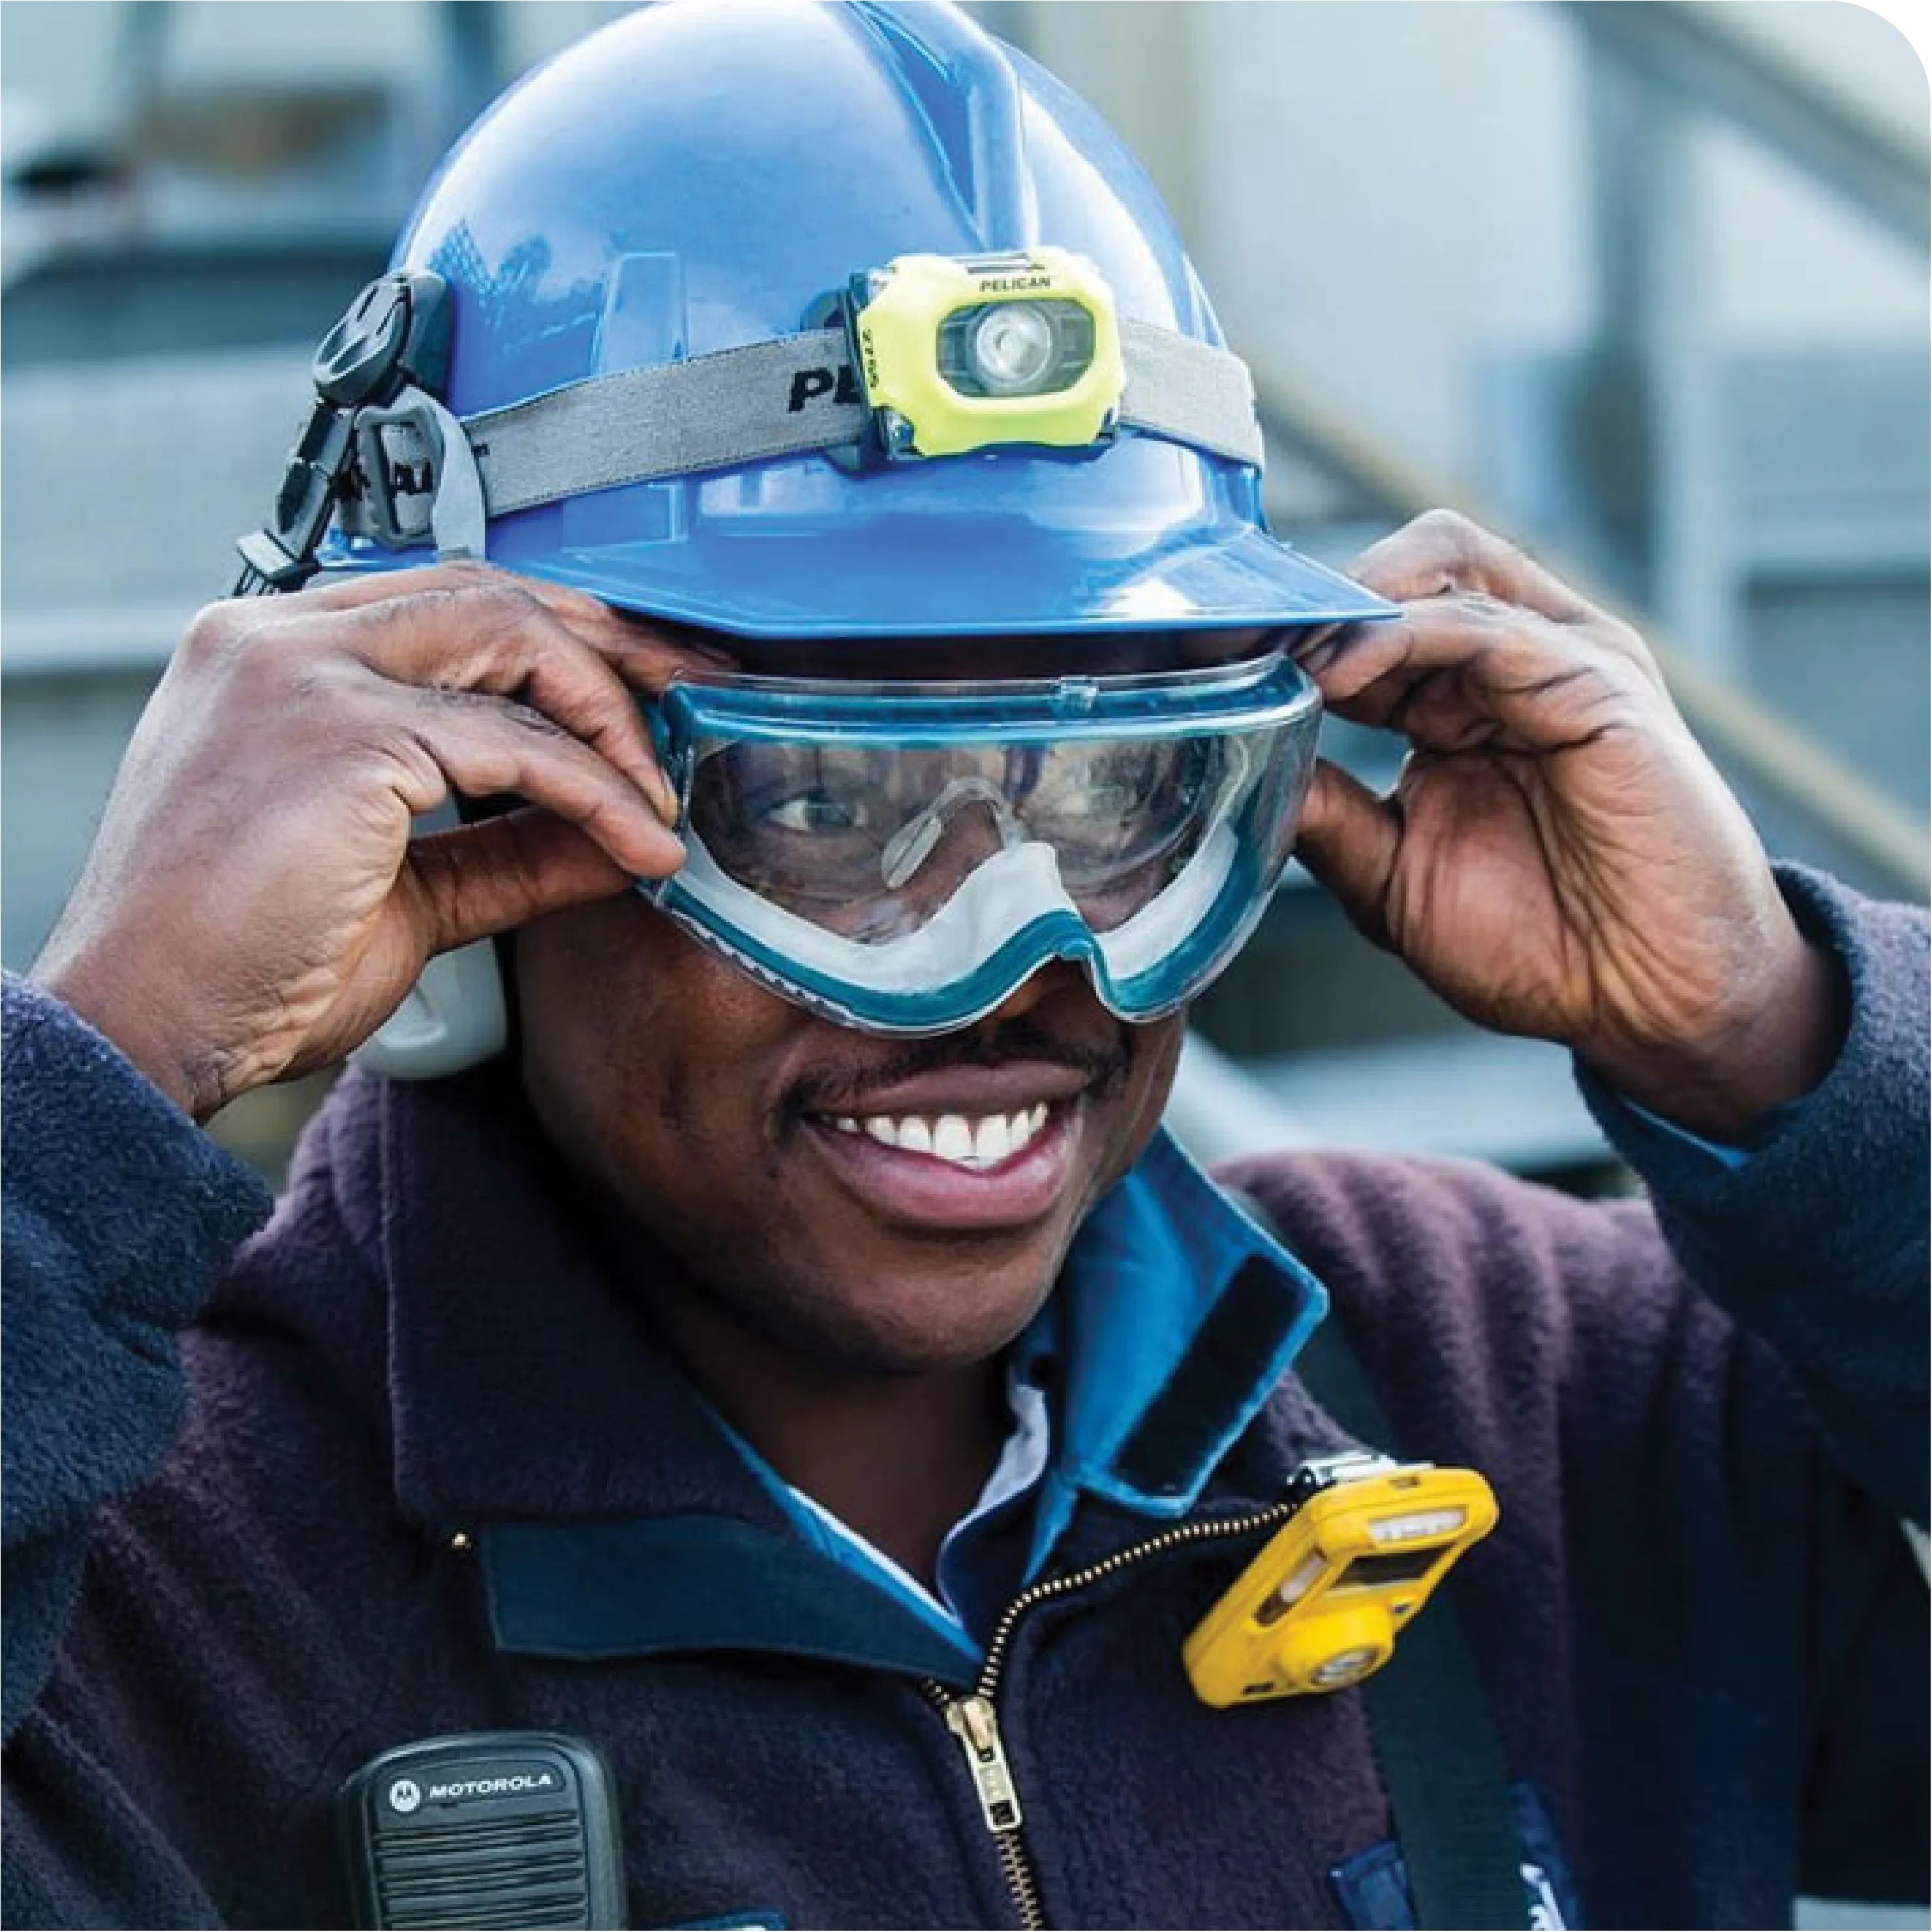 An image of an Imperial Oil employee wearing hard hat and safety googles.